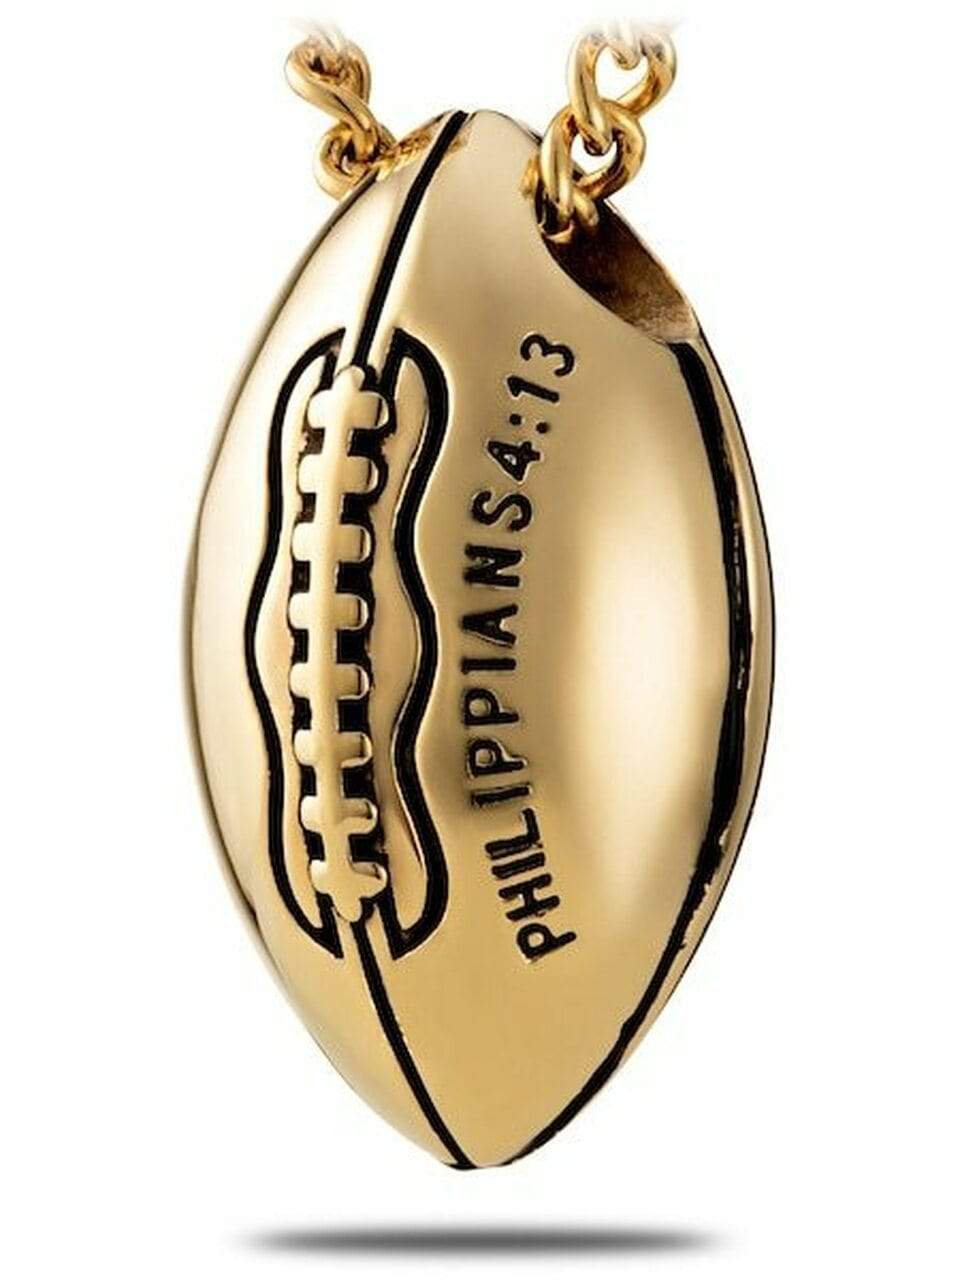 Gold Stainless Steel Football Necklace Philippians 4:13